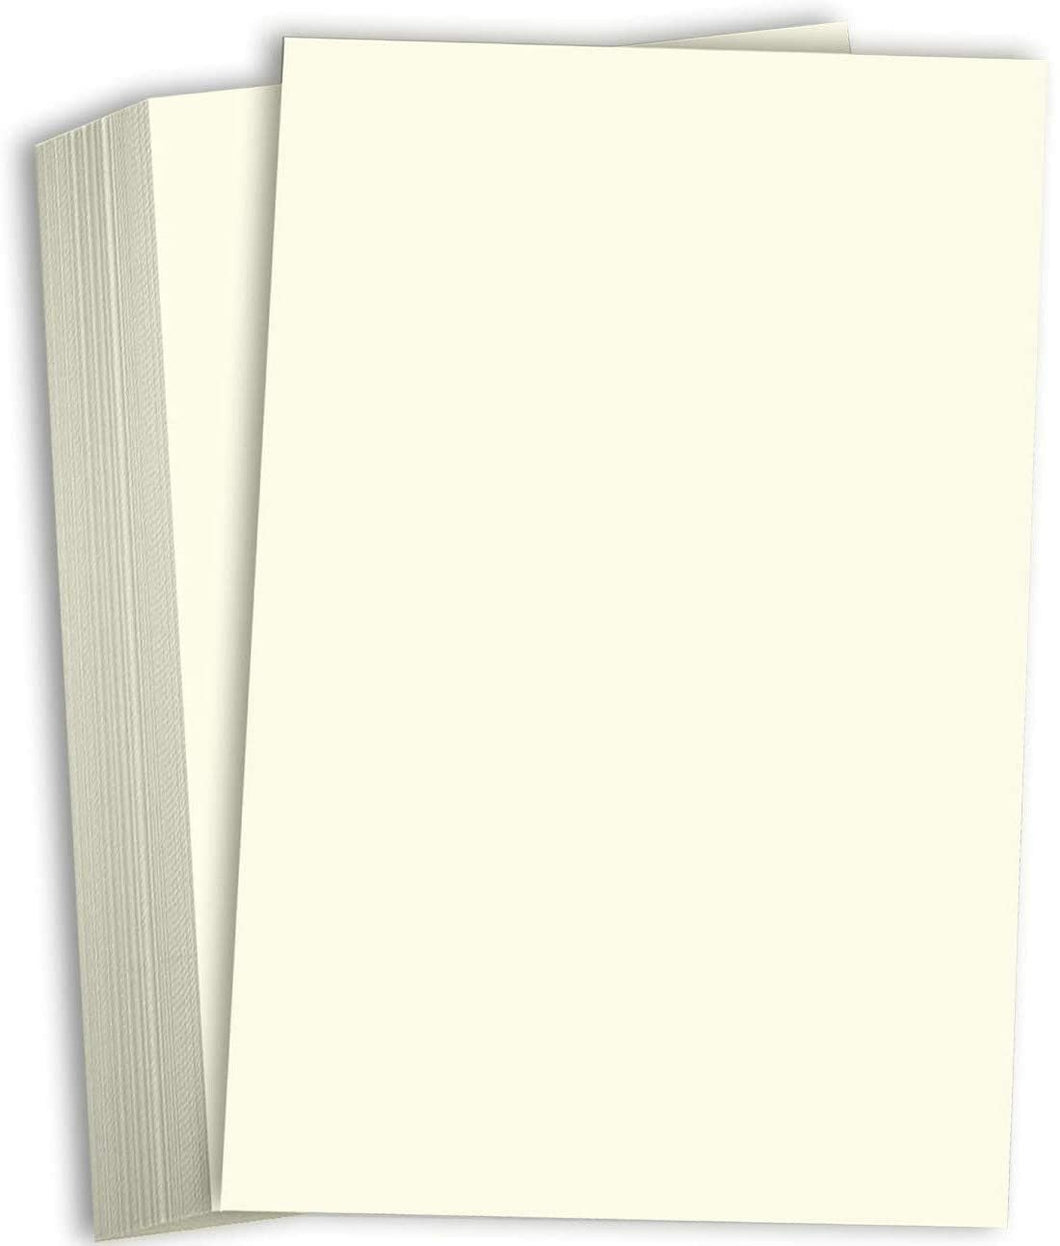 Hamilco Cream Cardstock 11x17 Paper Heavy Weight 80 lb Cover Card Stock 25 Pack